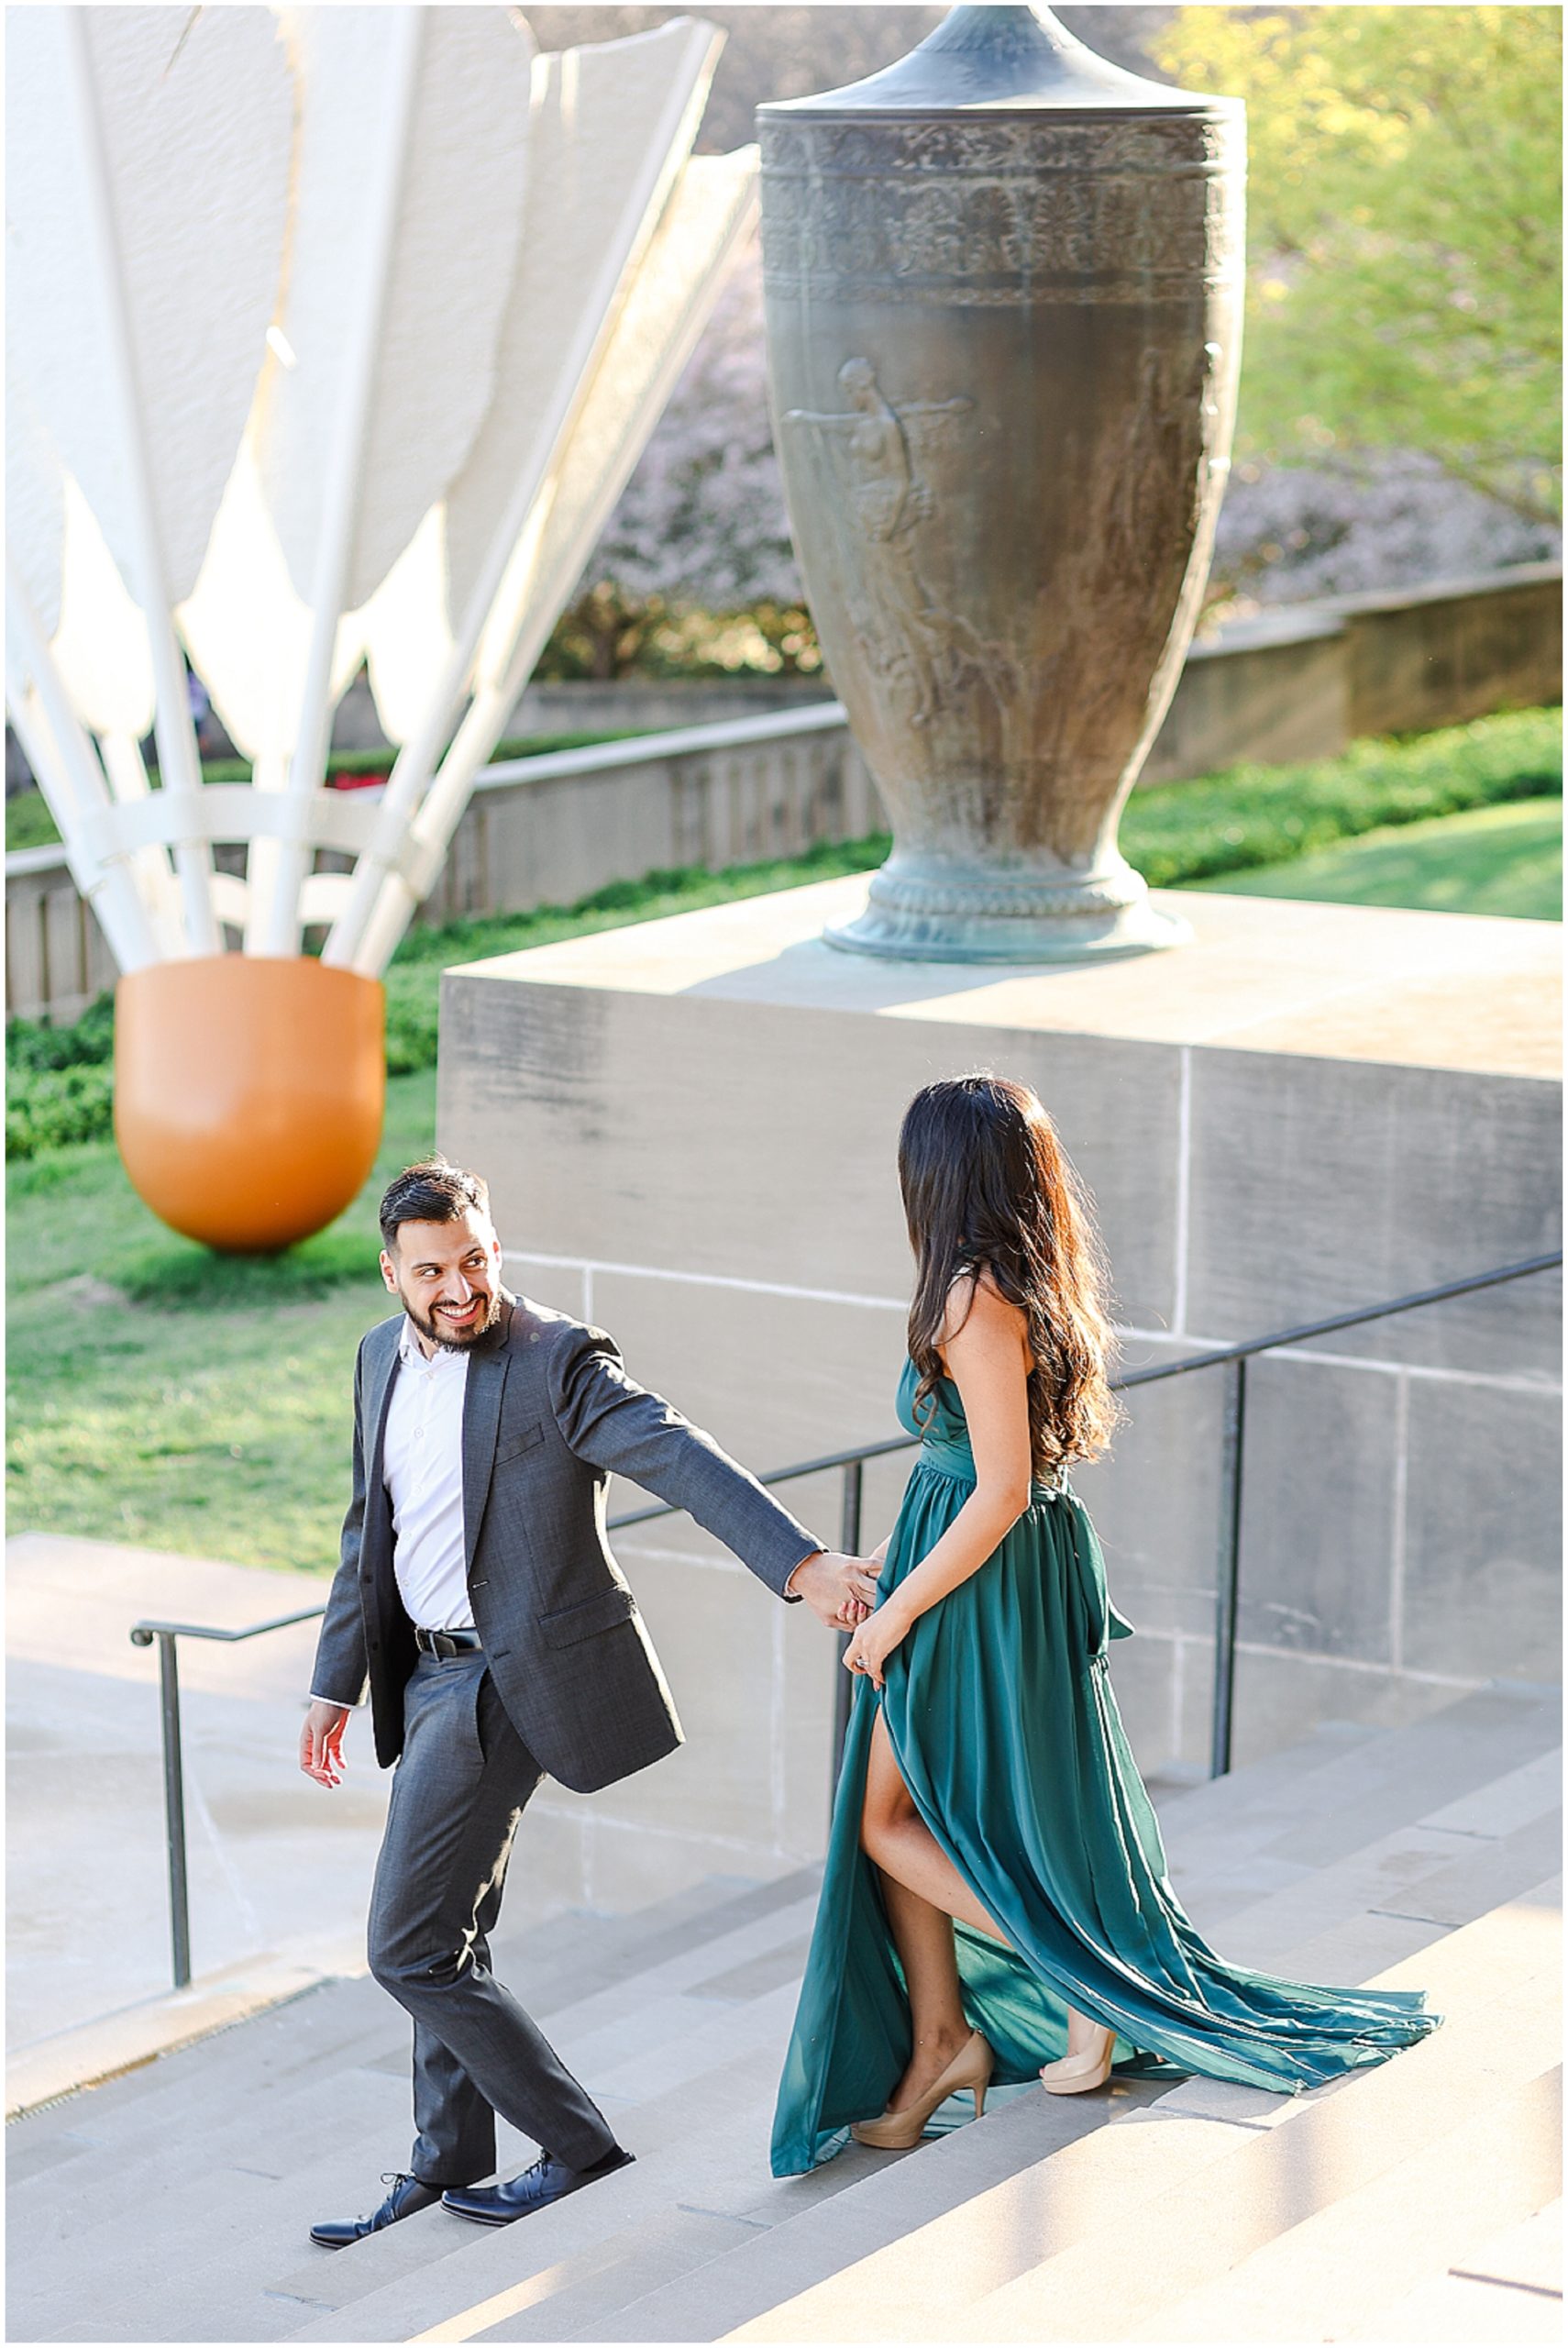 spring engagement session with mariam saifan photography - a kansas city wedding and engagement portait photographer - family photos - what to wear for your engagement session - elegant and classy wedding photos 